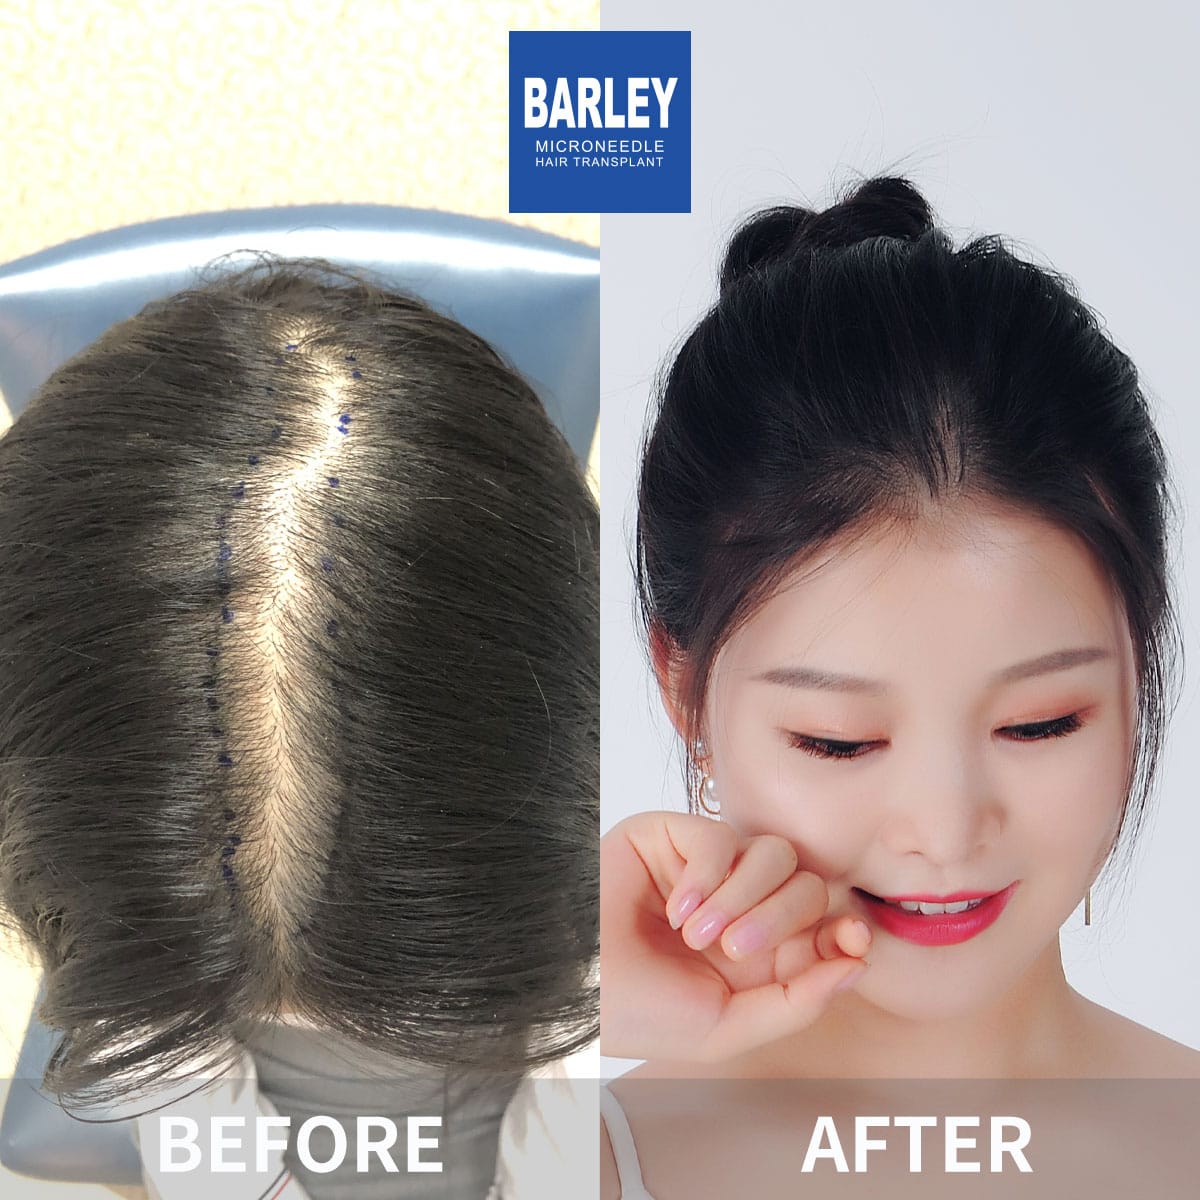 barley before and after hair transplant